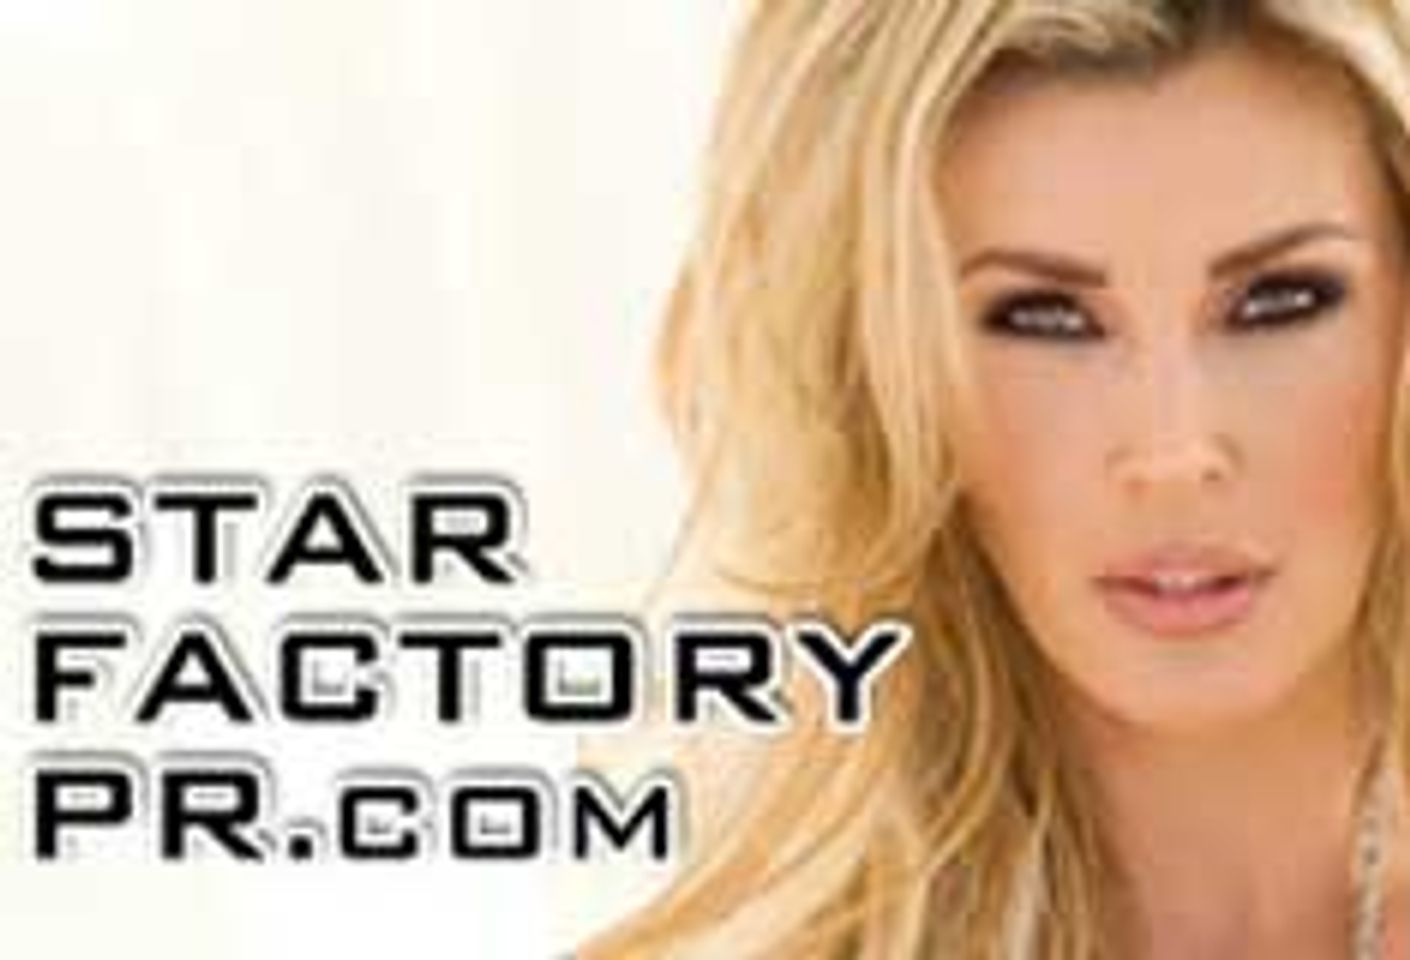 Lexi Lowe Signs Star Factory PR for International Publicity